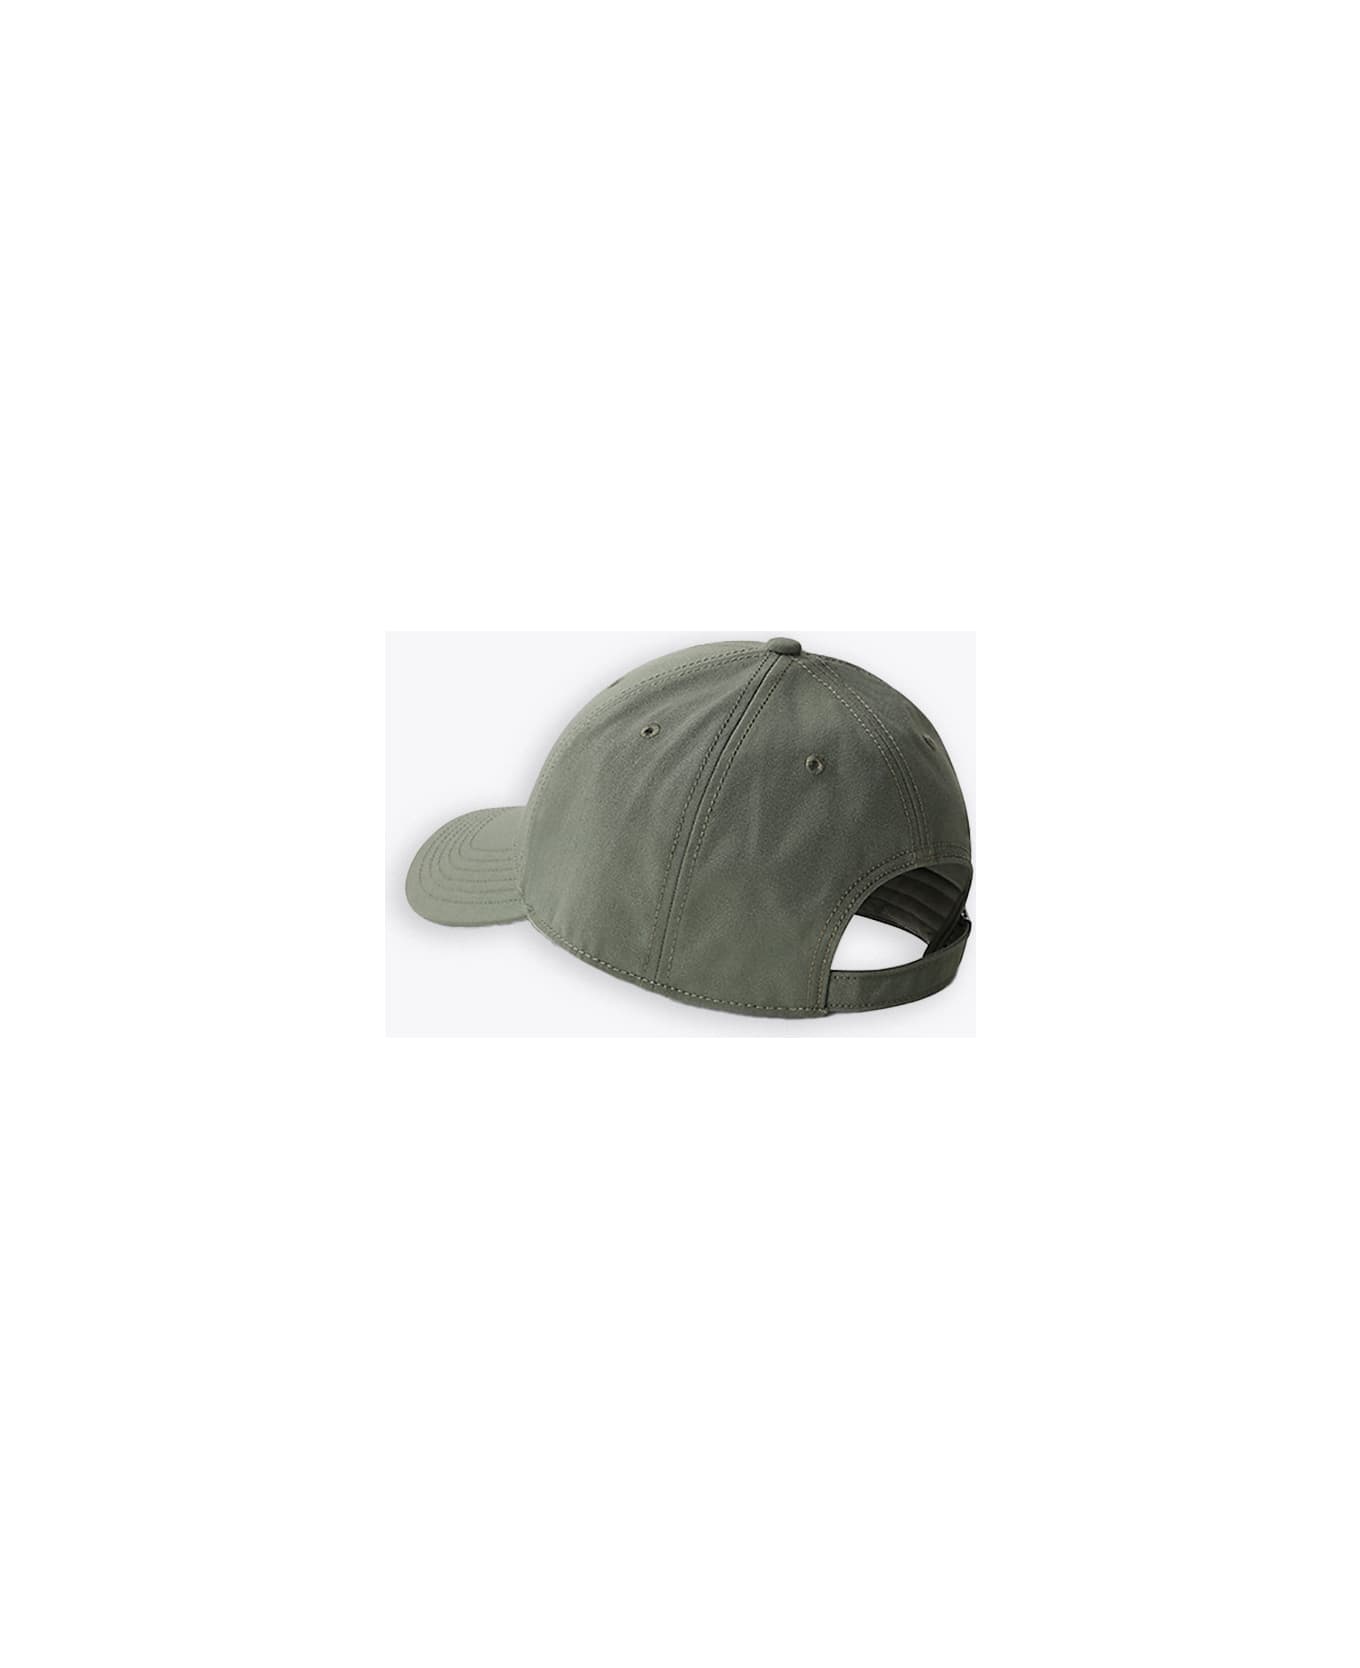 The North Face Recycled 66 Classic Hat Green cap with logo embroidery - Recycled 66 classic hat - Verde